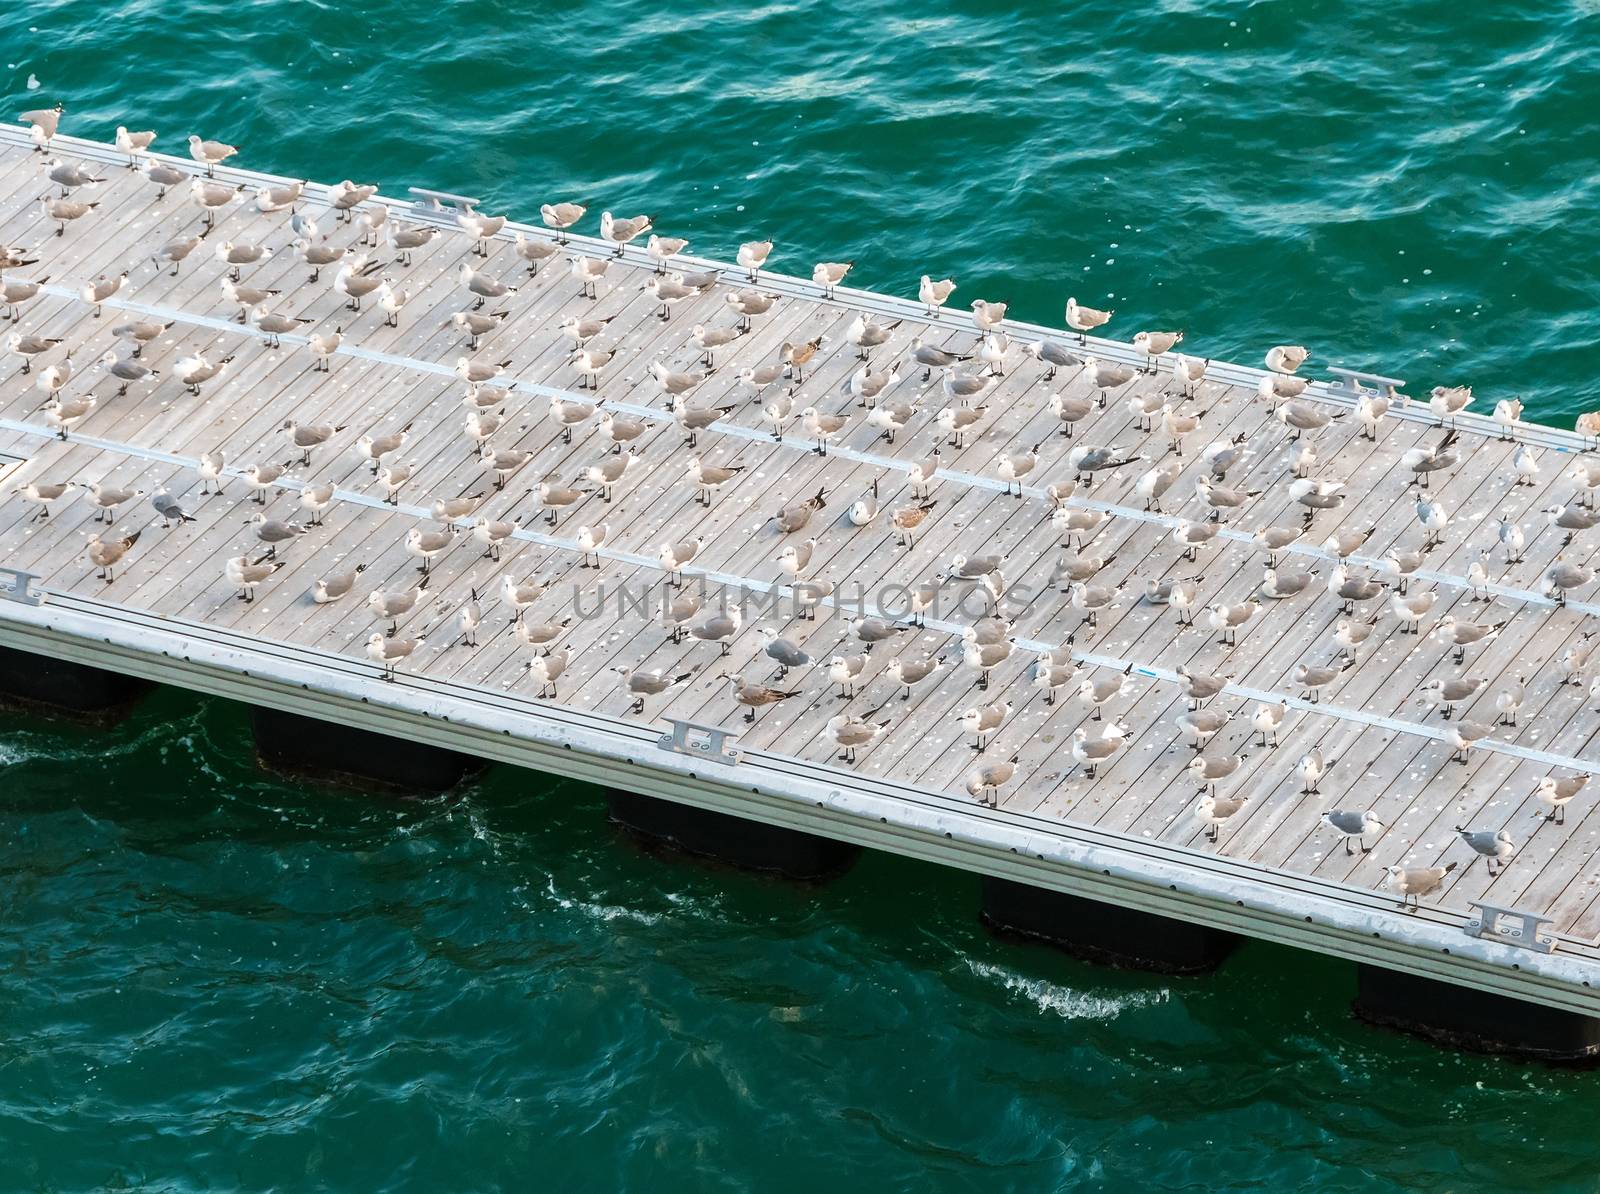 Seagulls on the Pier by whitechild